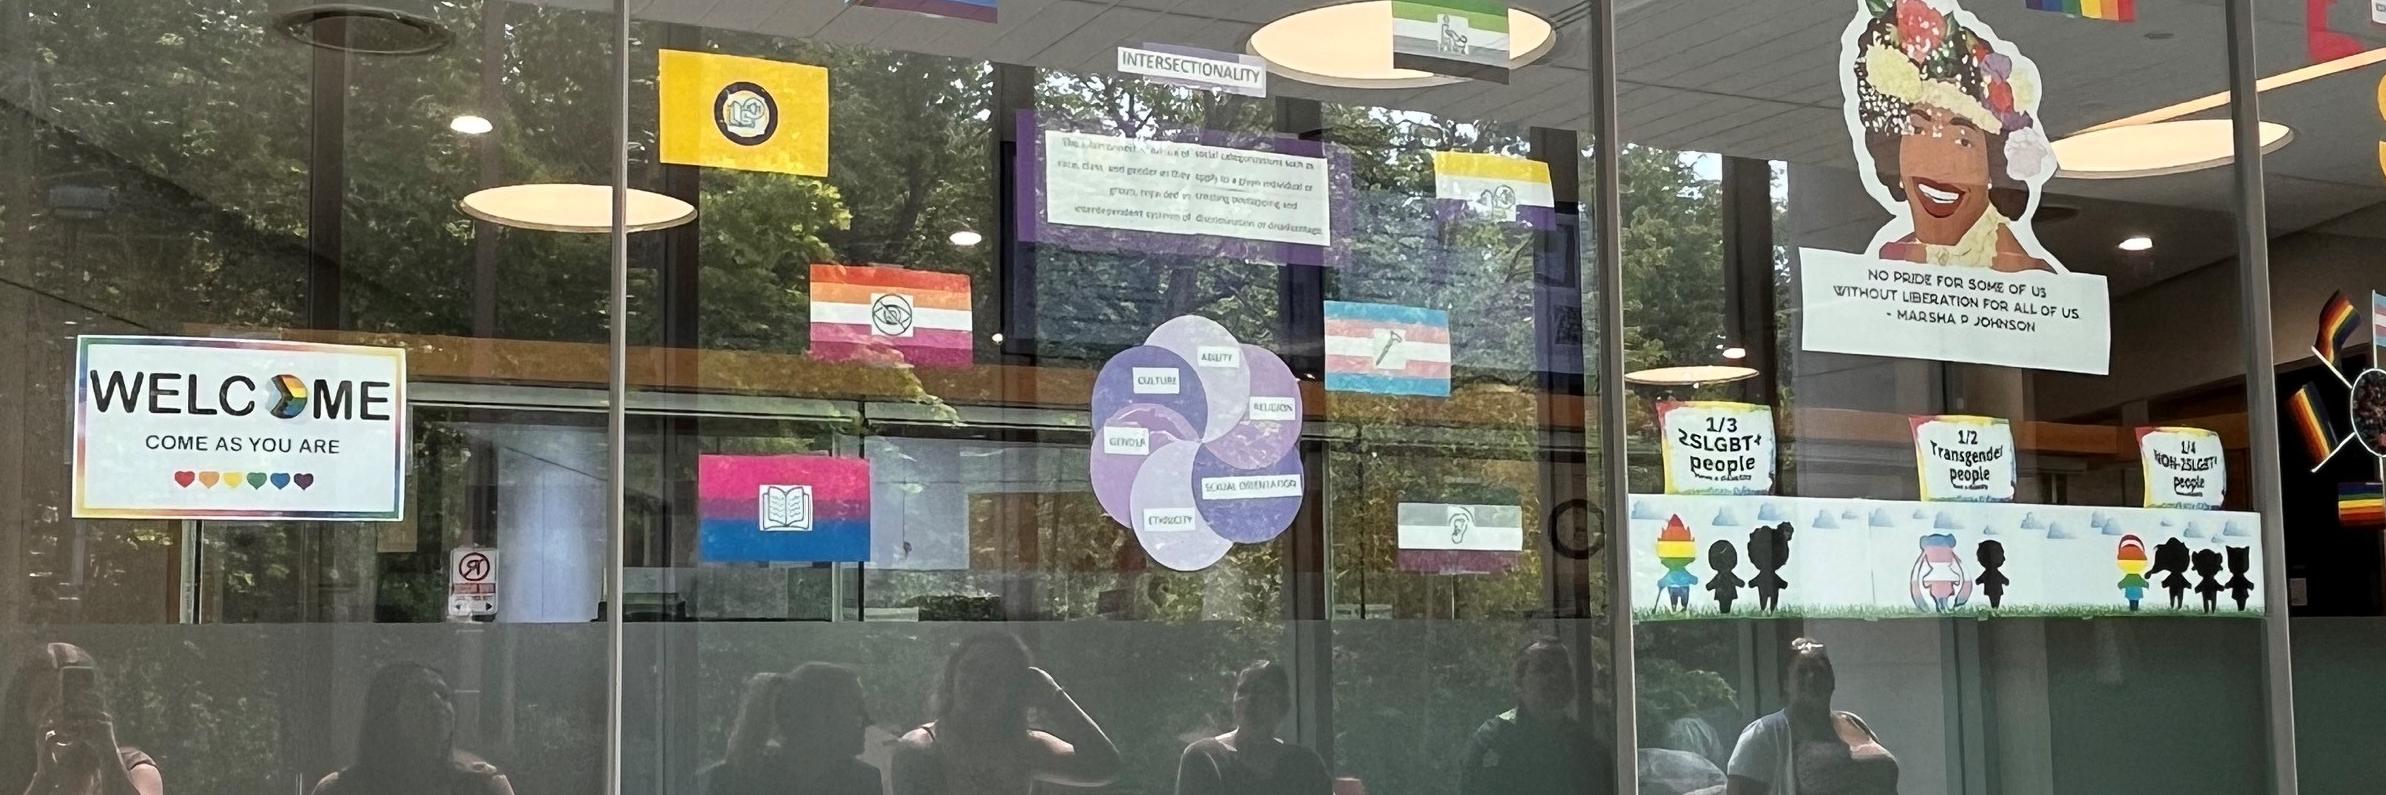 AccessAbility Window display for pride month.  Images recognizing intersectionality - disaiblity and LGBTQ+ identity